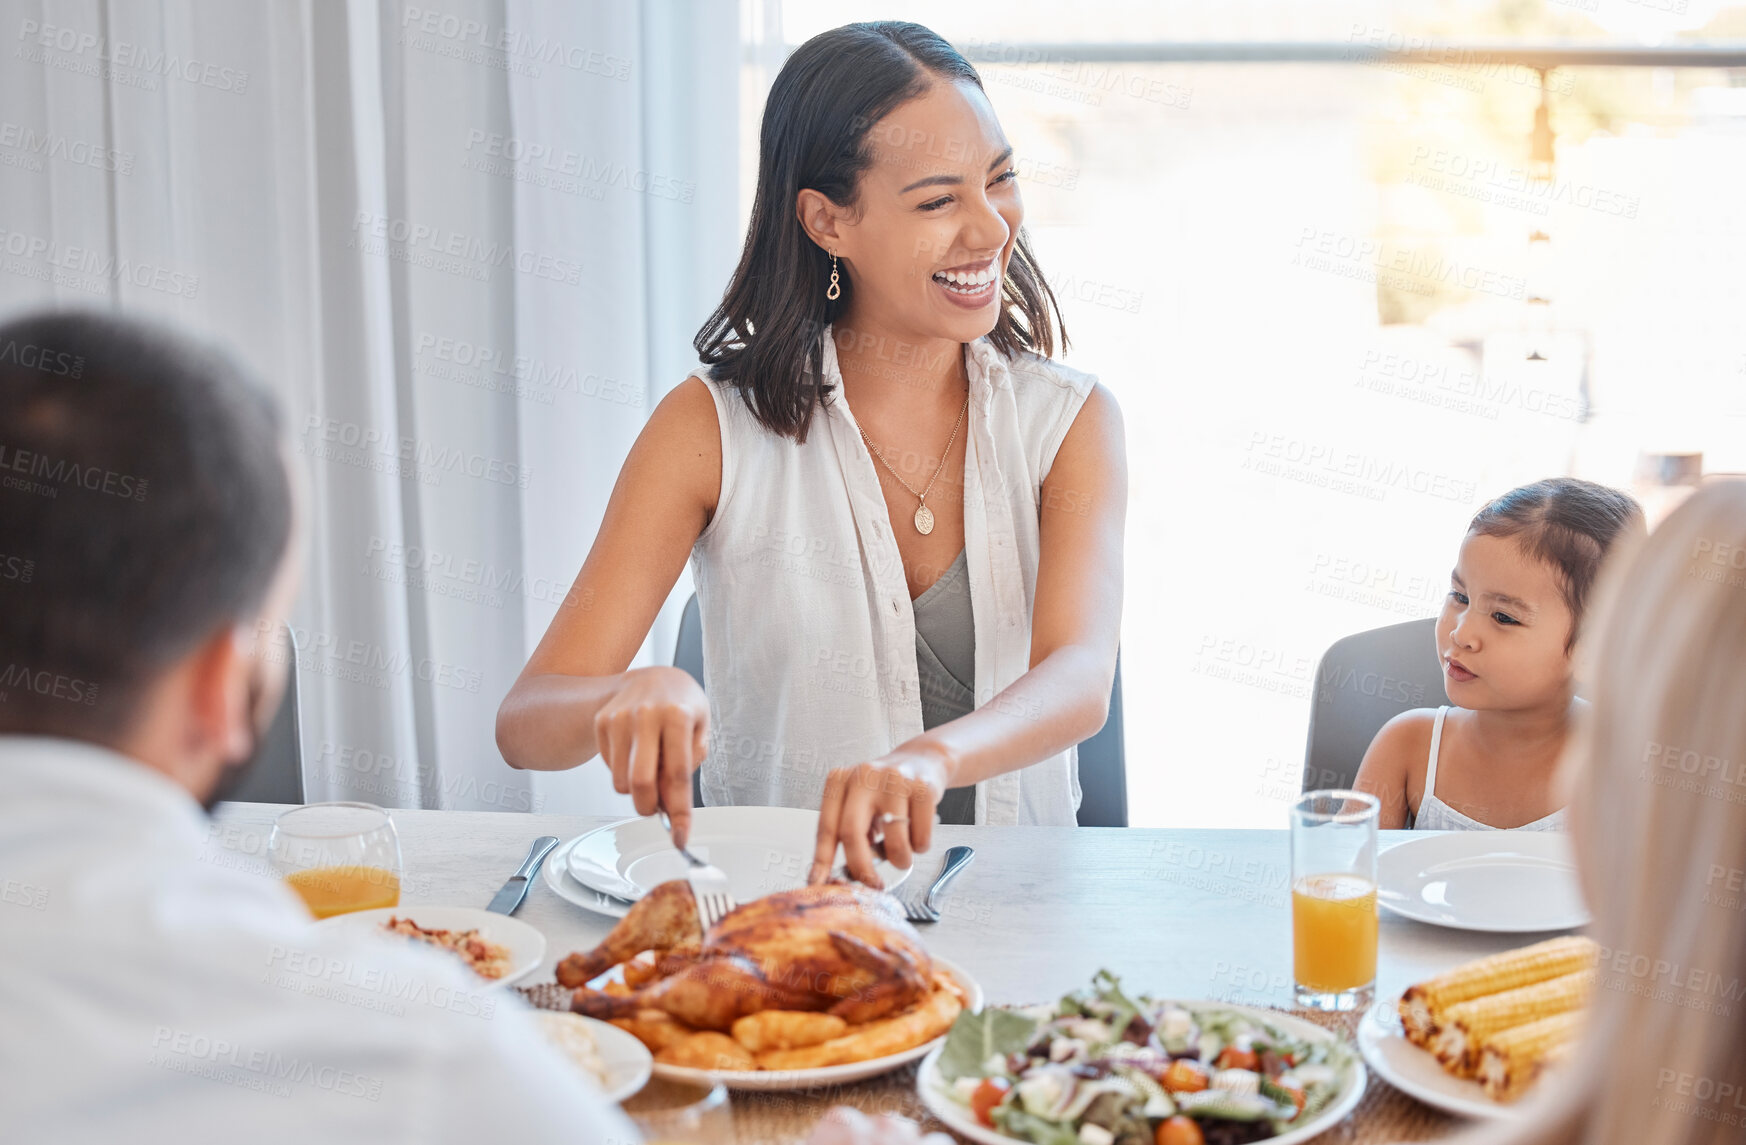 Buy stock photo Chicken, happy and family lunch with woman cutting with knife, meal and food in dining room or celebration event. Love, happiness and group of people eating or laugh at brunch in family home together